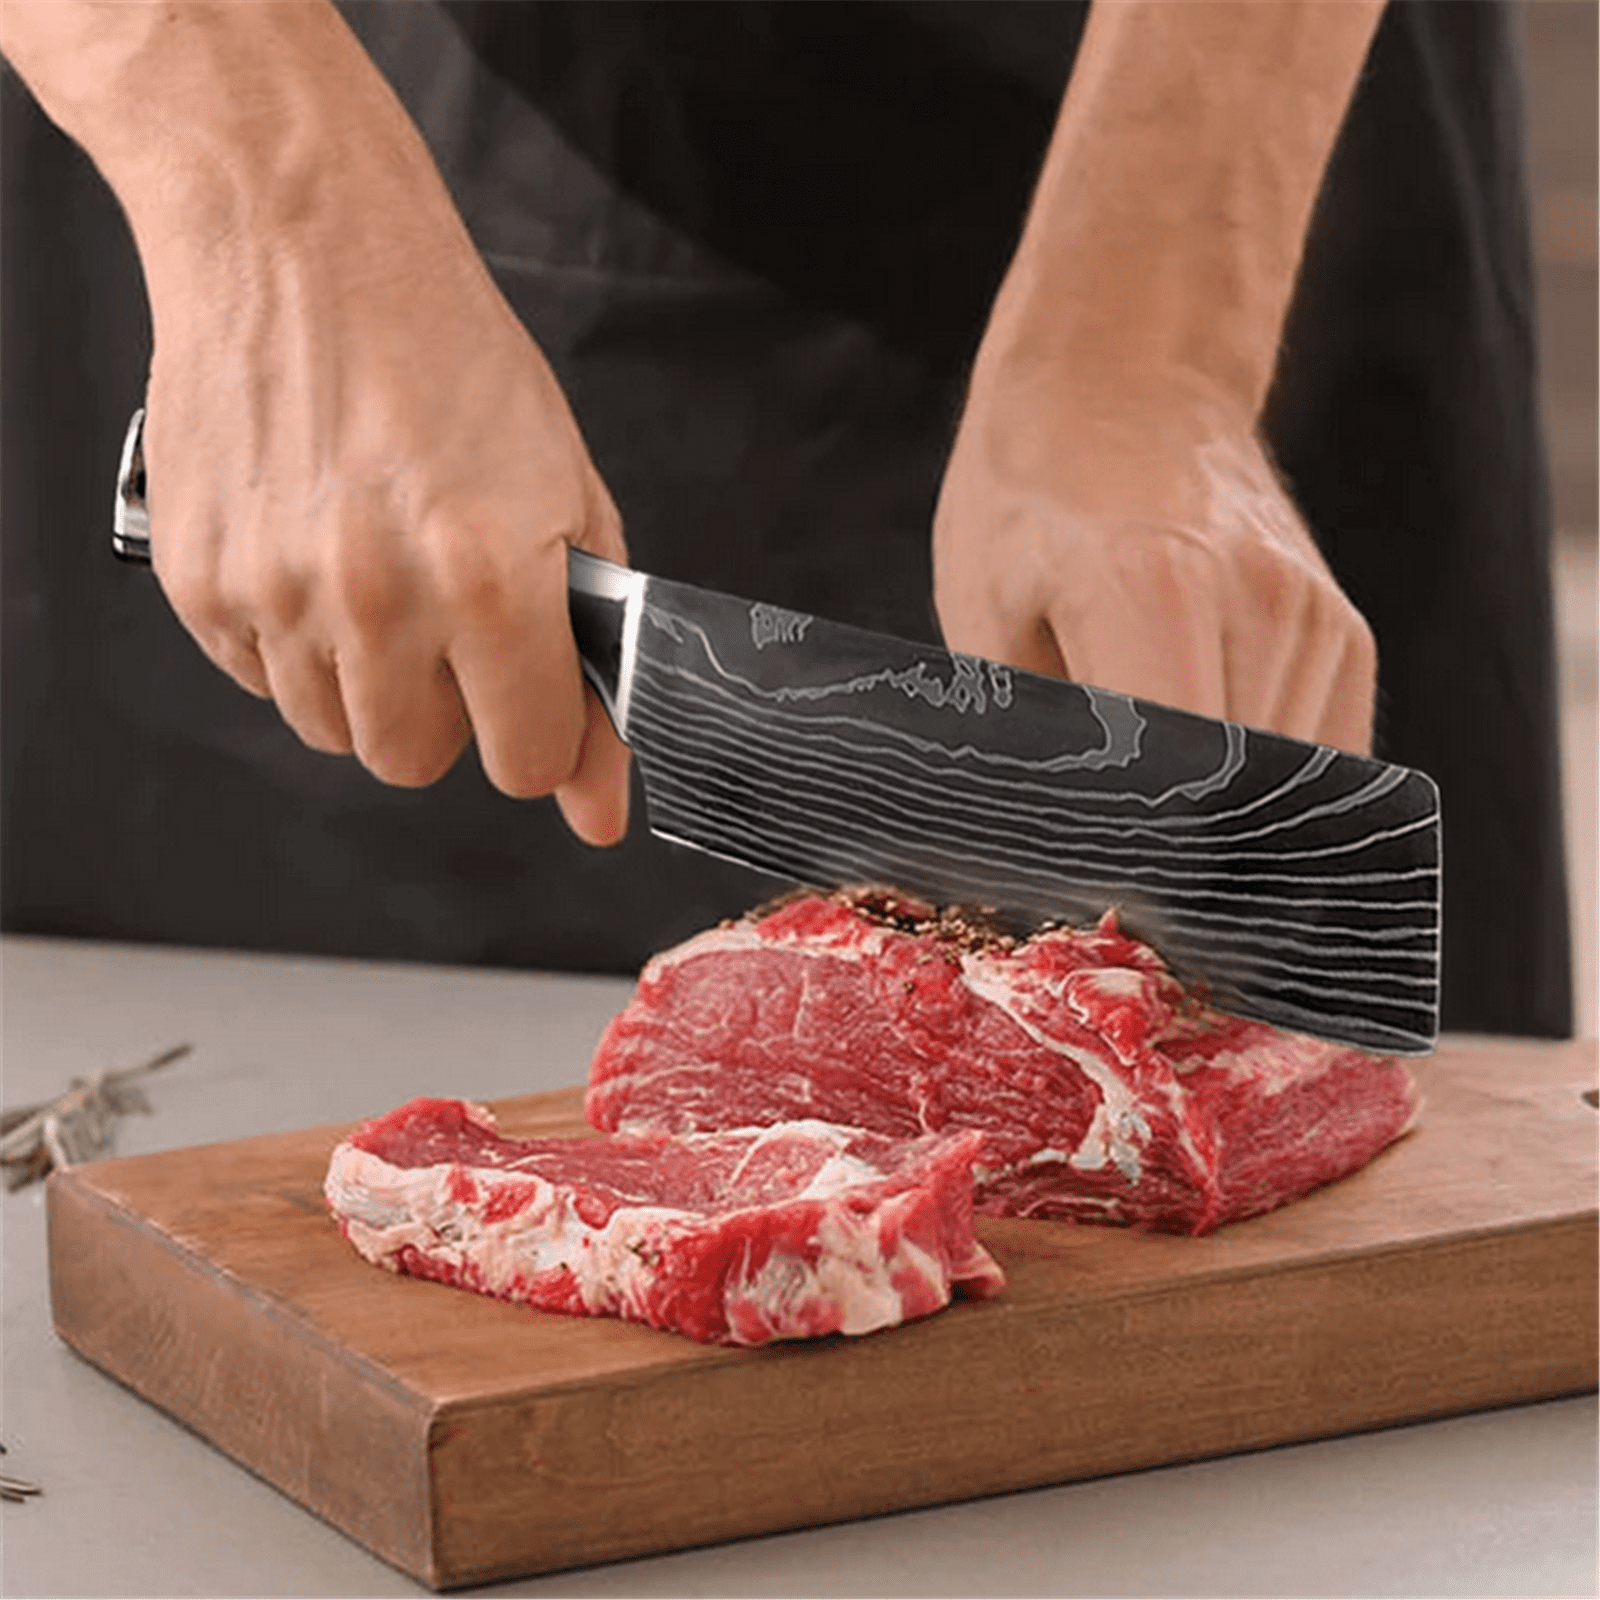 Kitchen Knife Set 5 inch 7 inch 8 inch Stainless Steel Chef Knives Damascus Laser Japanese Knives Utility Slicing Butcher Knife Chinese Meat Cleave